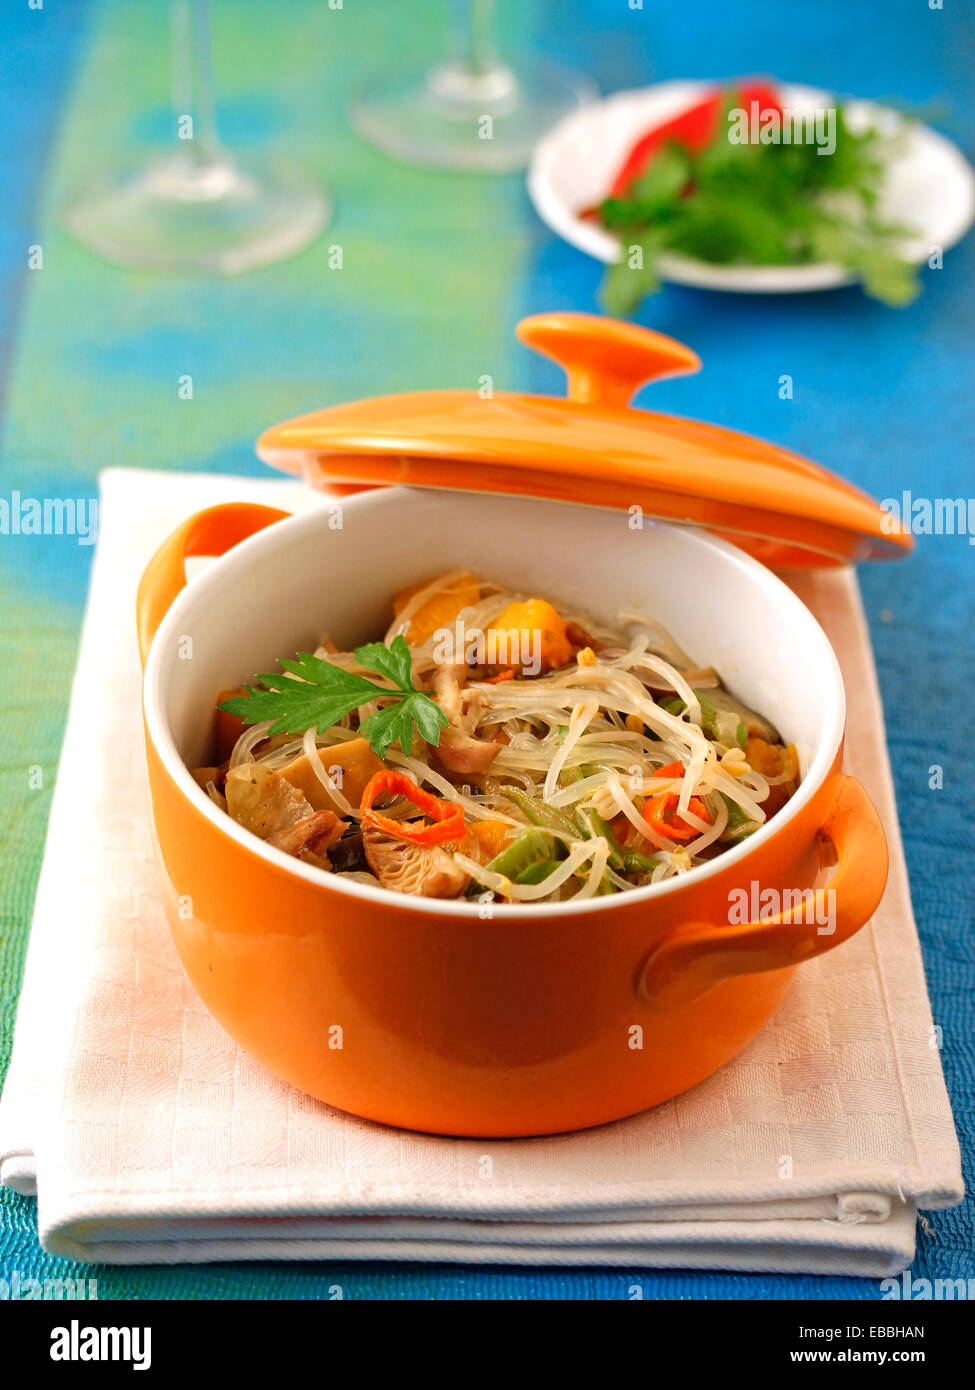 Rice noodles with vegetables. Recipe available. Stock Photo